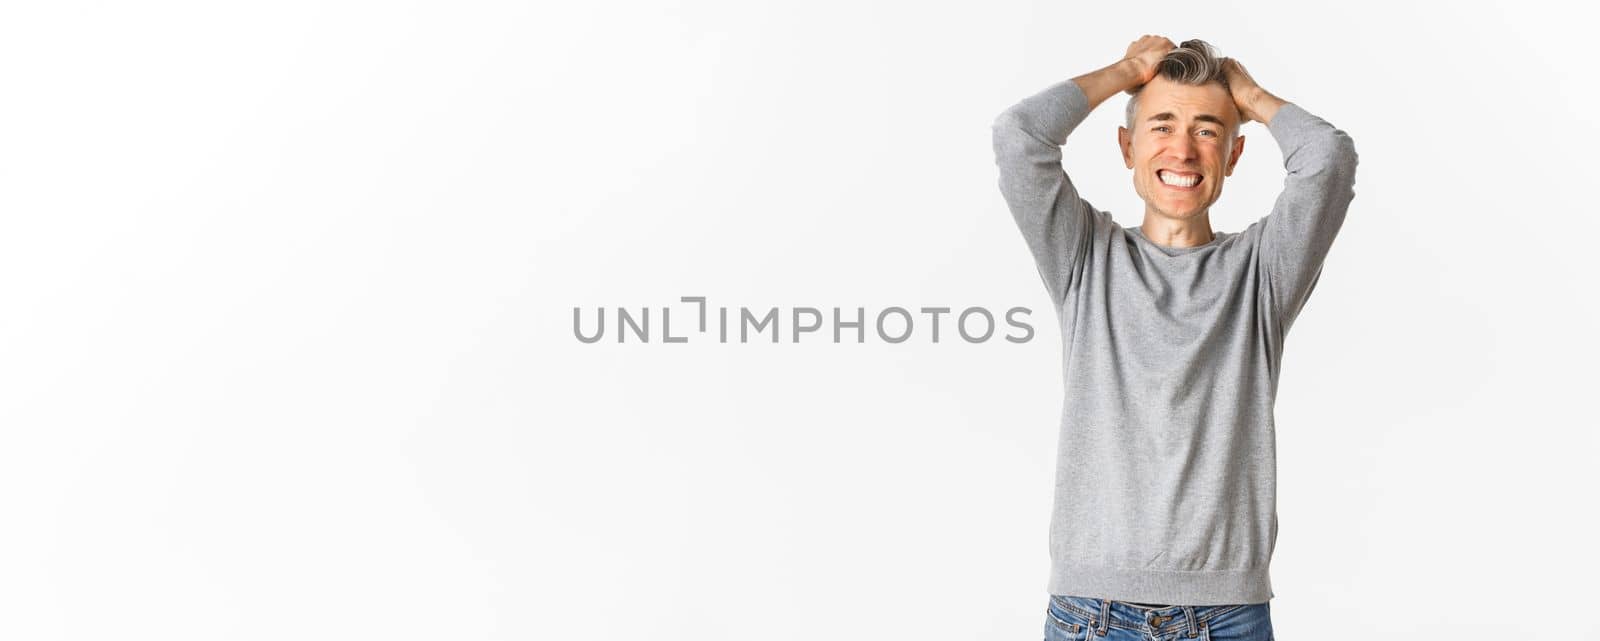 Image of frustrated middle-aged man panicking, losing something, ripping hair on head and grimacing from distress and failure, standing over white background.